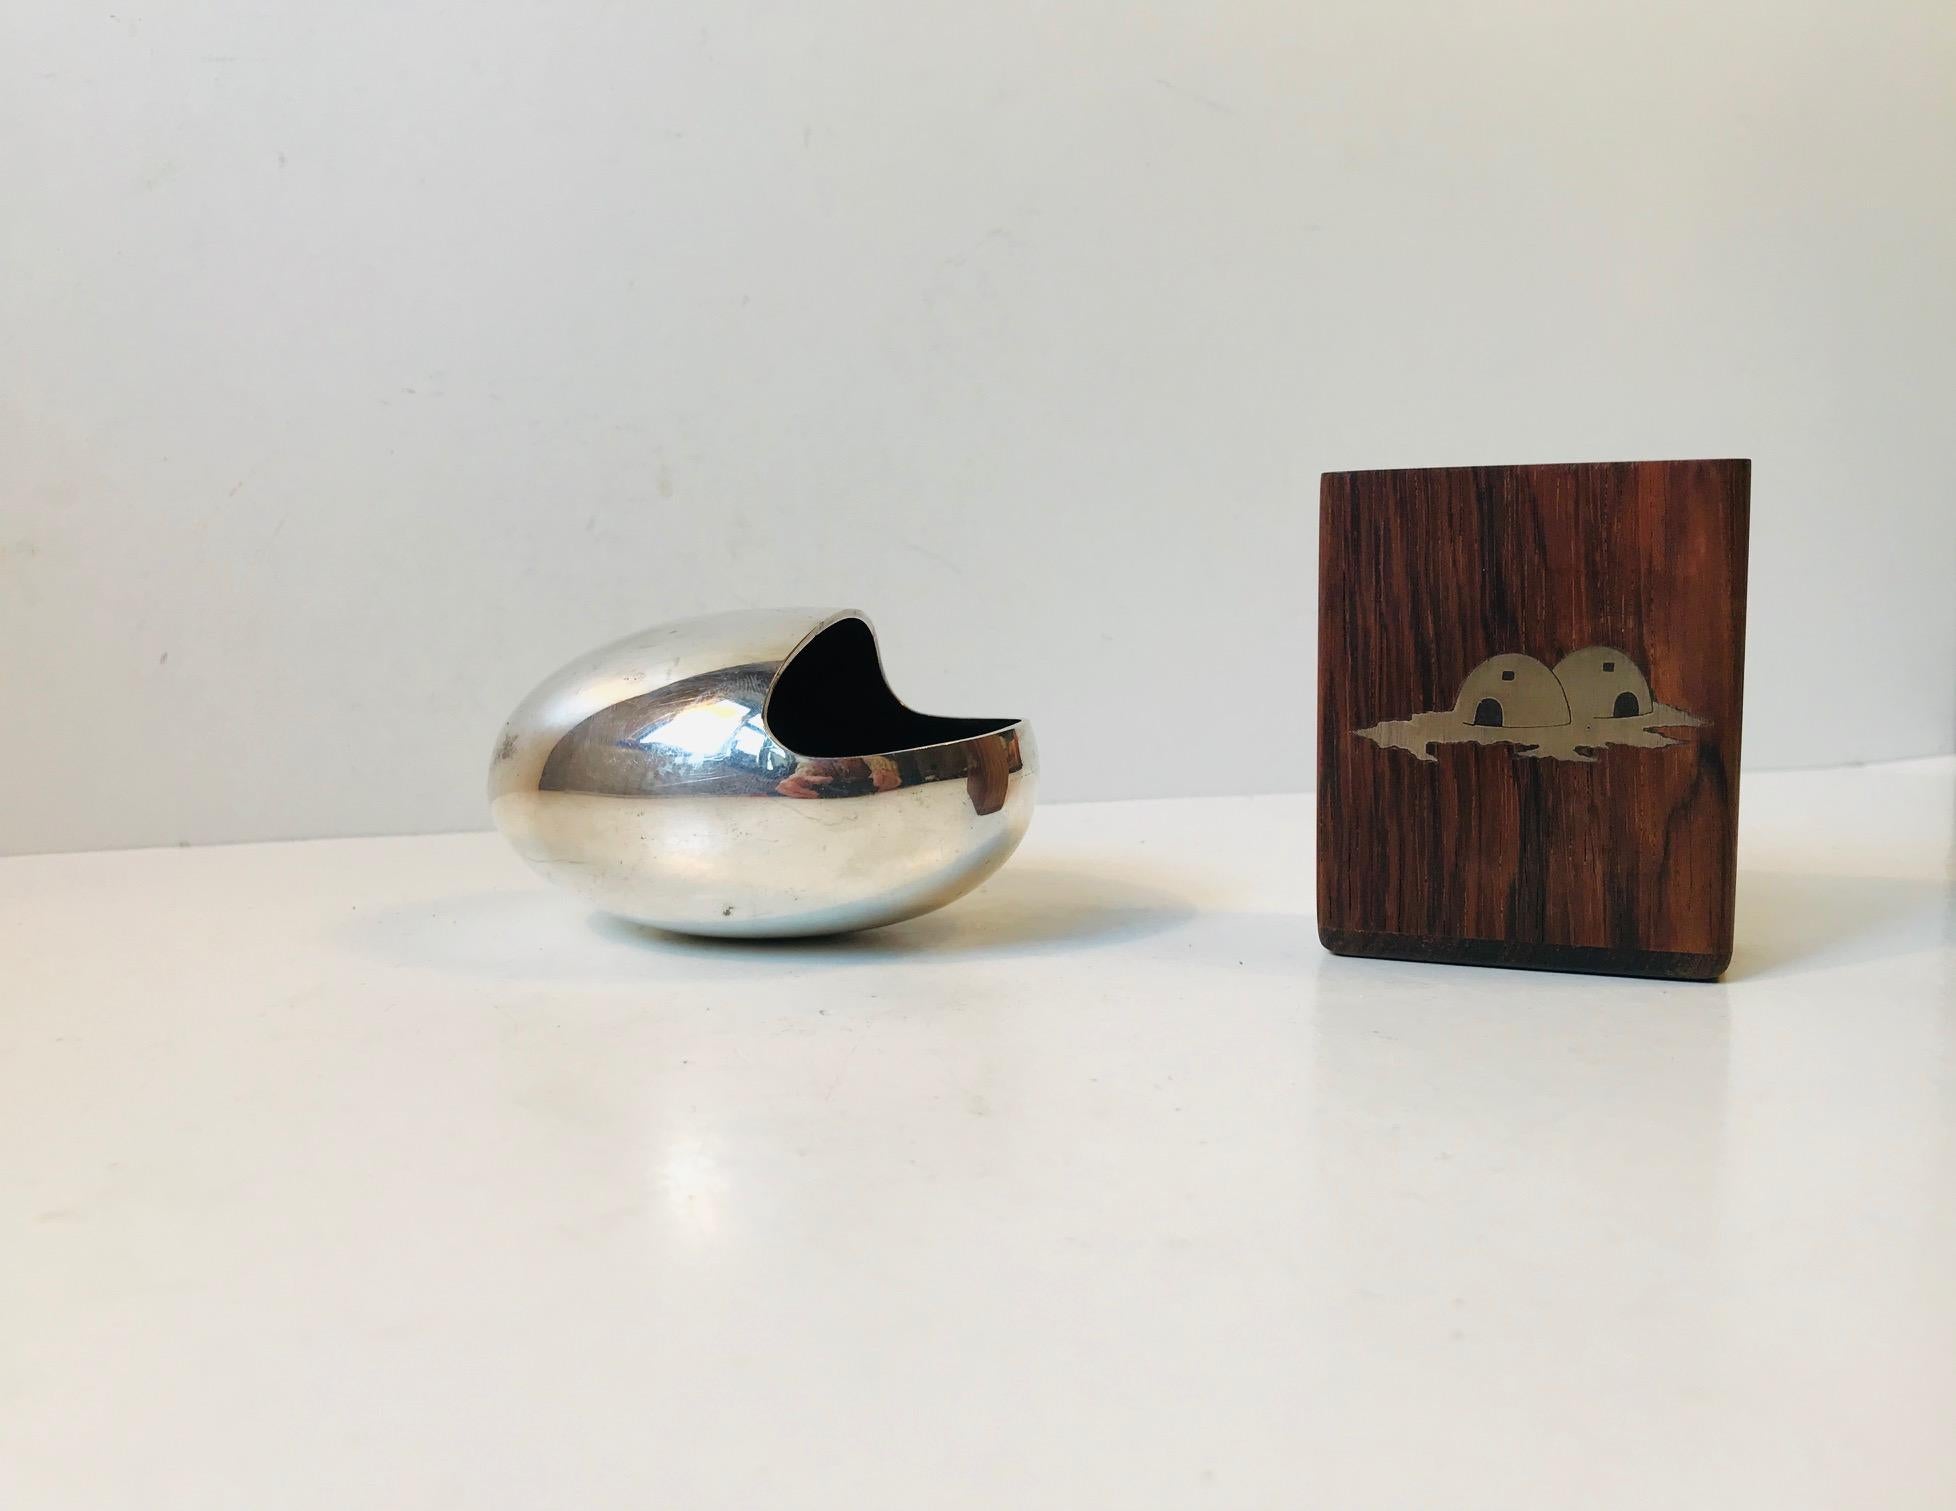 A midcentury set consisting of the smile ashtray by Carl Cohr and a cigarette holder by Axel Salomonsen. The ashtray is made from silver plated brass and the cigarette holder from sterling silver inlaid wood. Both pieces are Danish and date from the